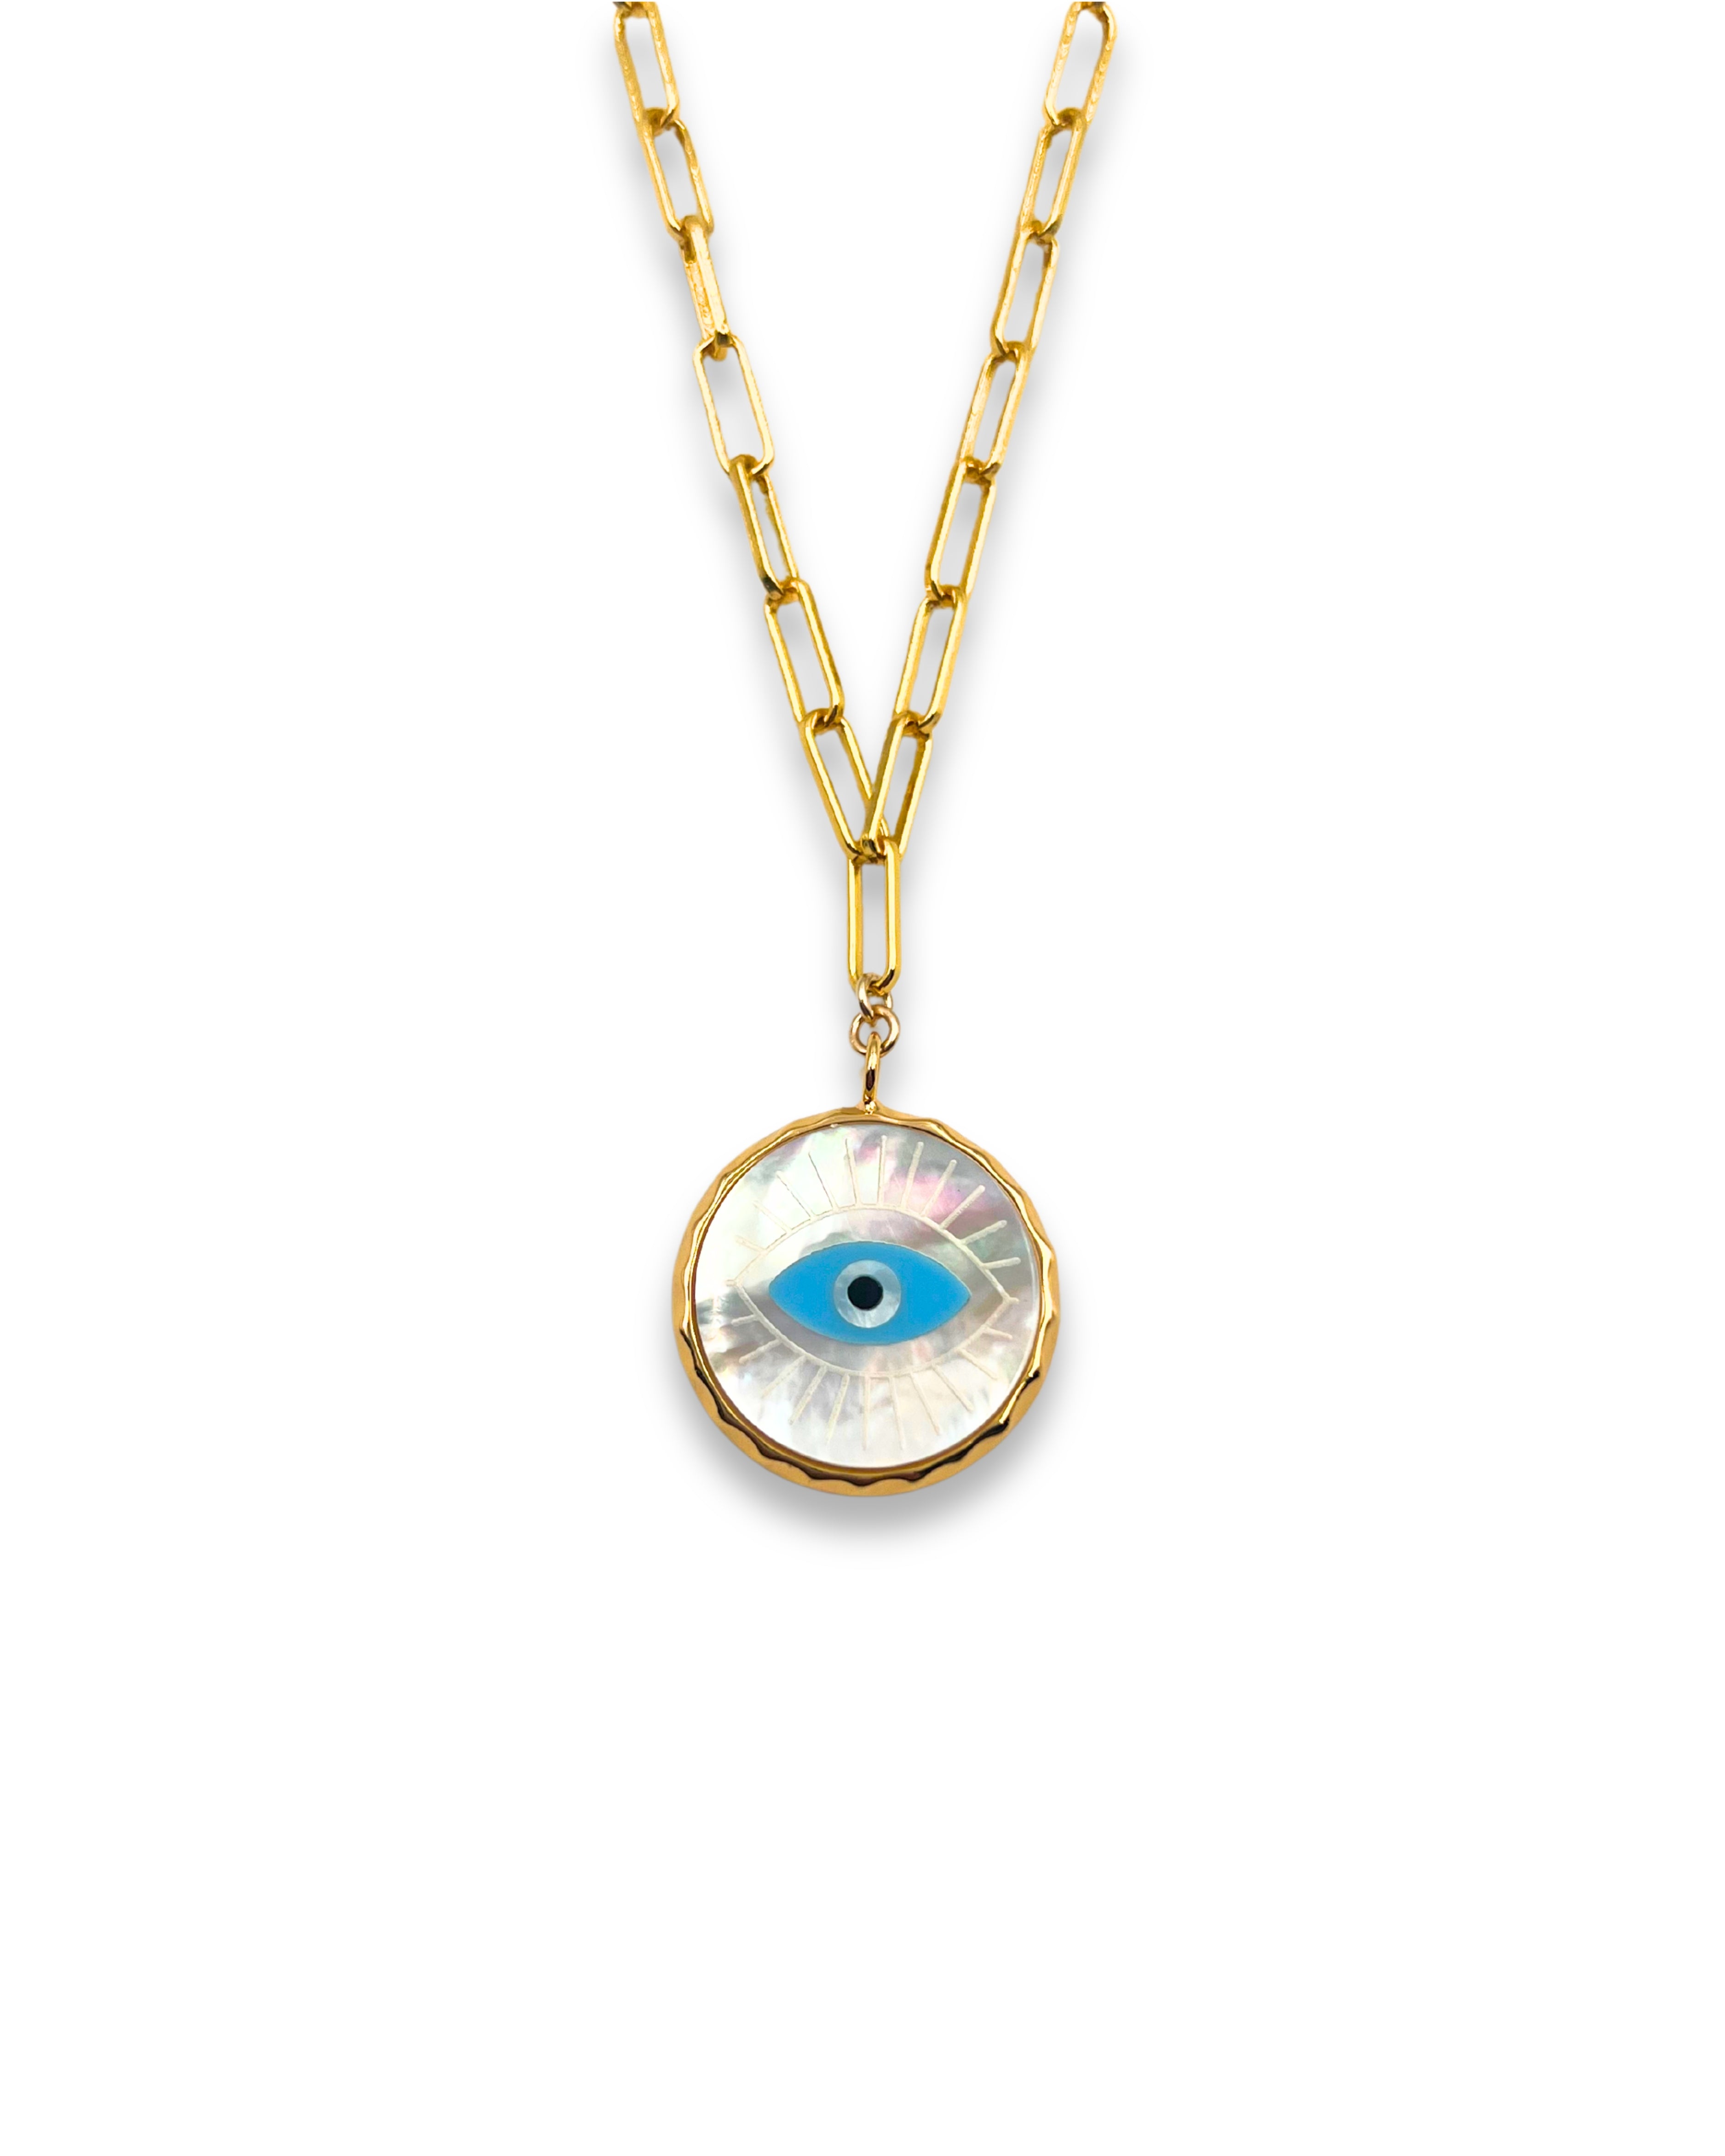 Carved Mother of Pearl Eye Charm Necklace